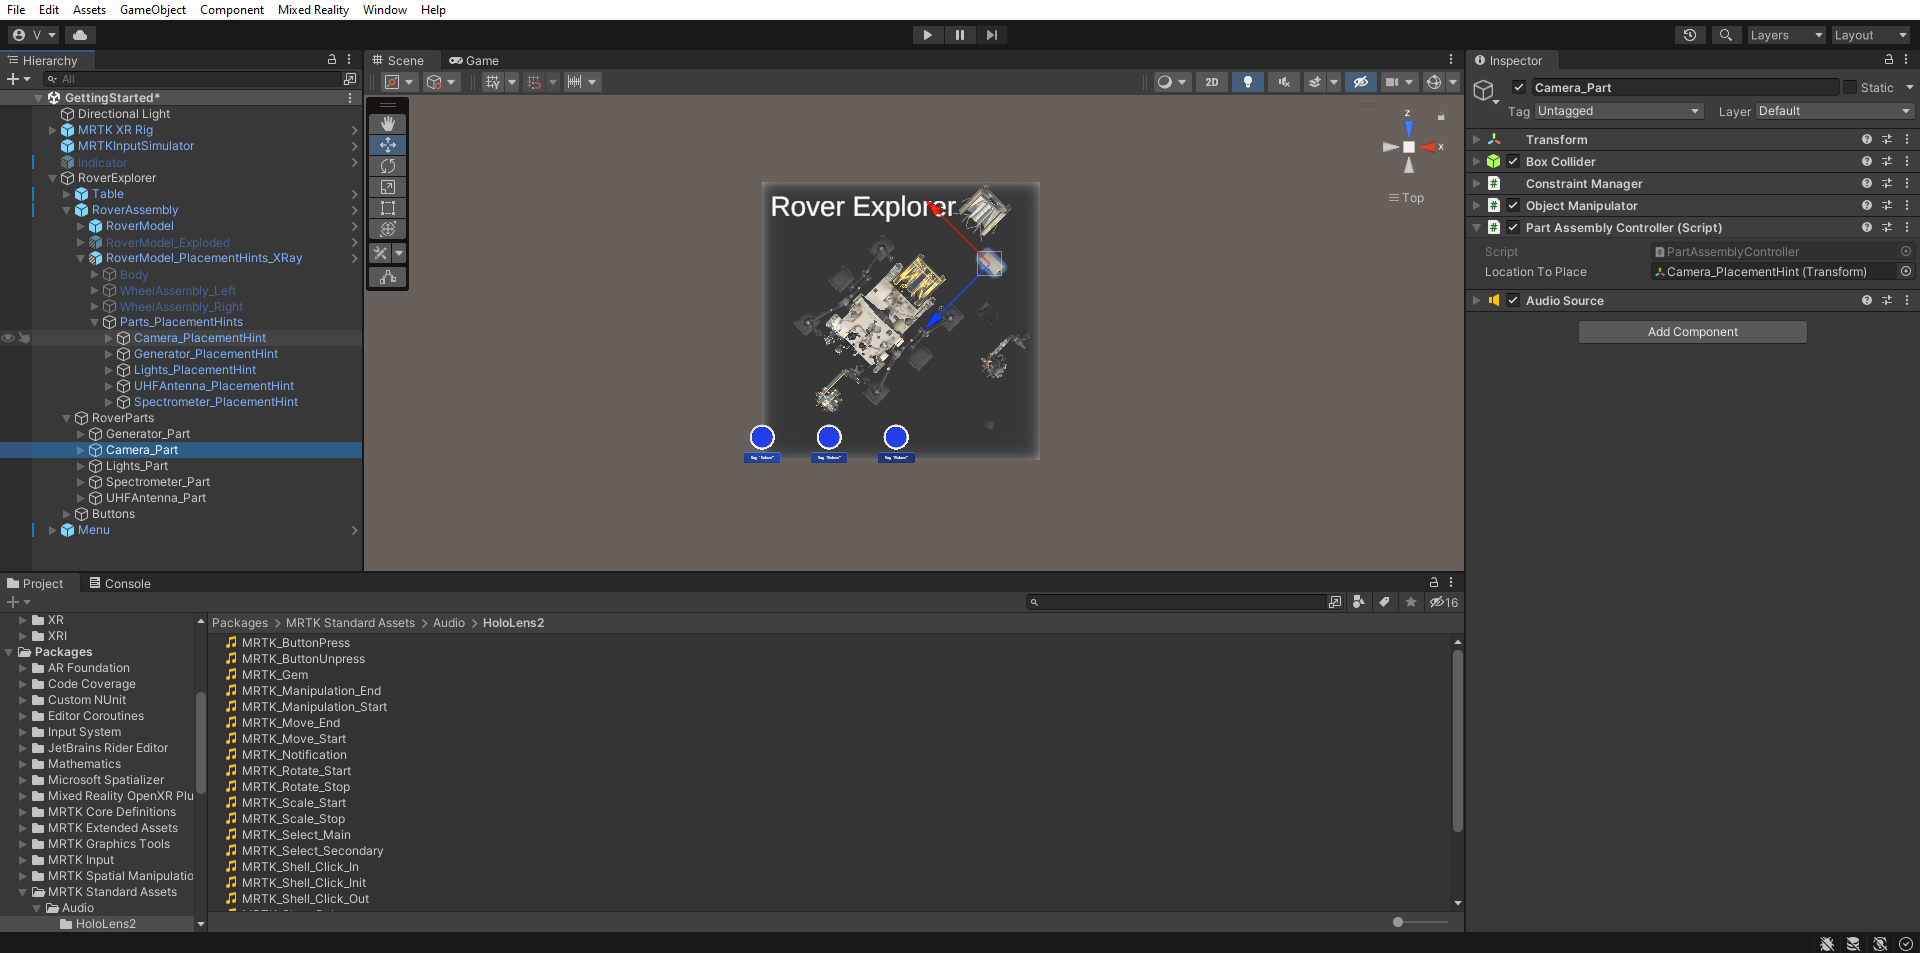 Screenshot of Unity with Camera_Part PartAssemblyController component configured.